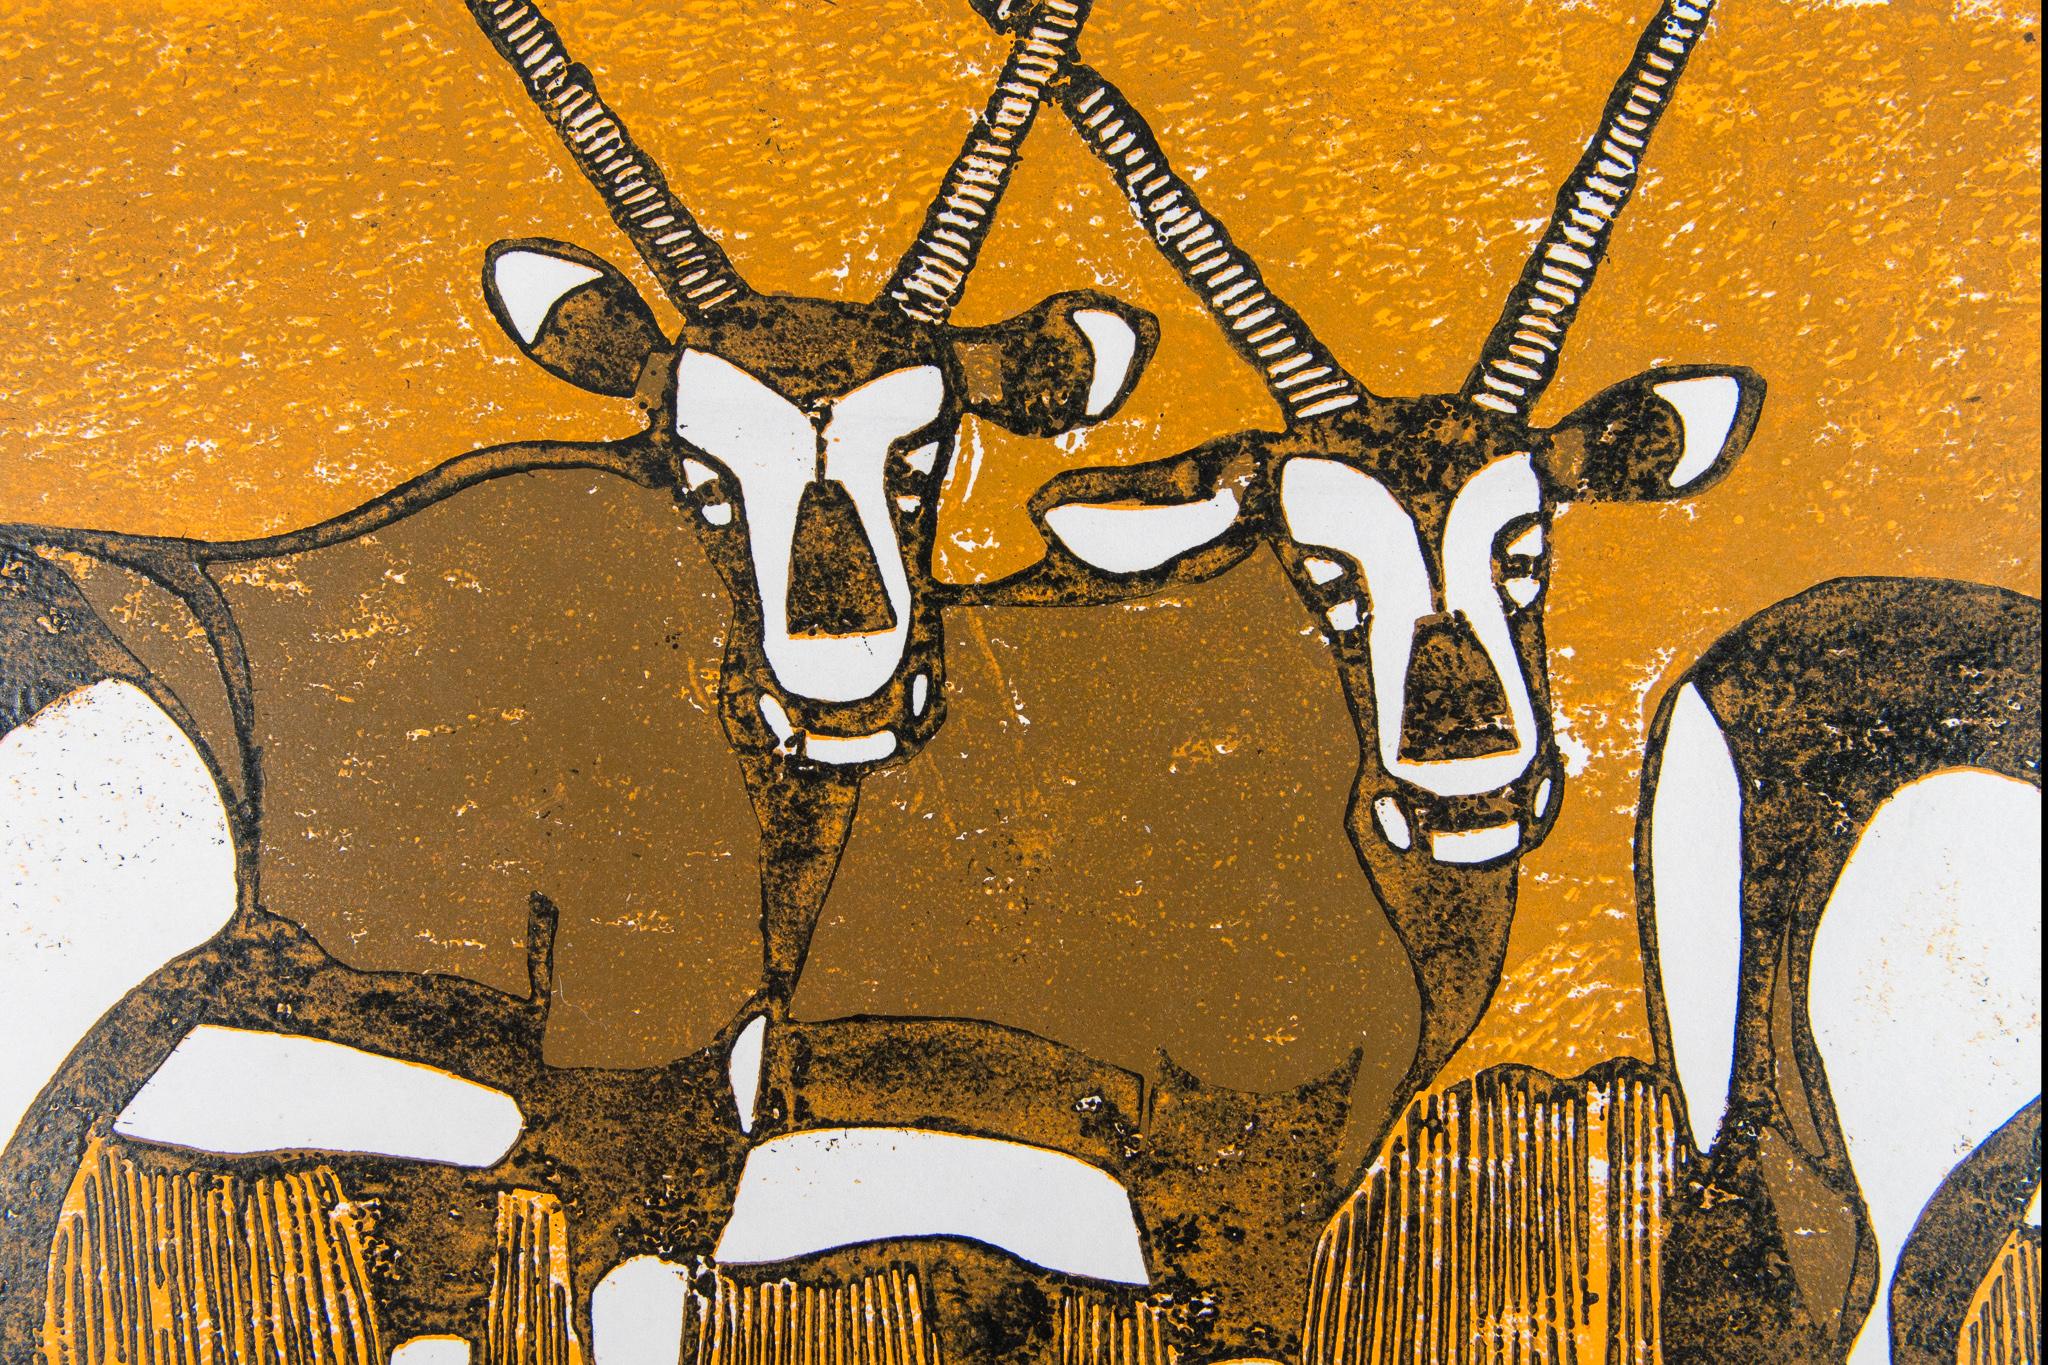 The Gemsboks, 2009. Cardboard print on paper.

Elia Shiwoohamba was born in 1981 in Windhoek, Namibia. He graduated from the John Muafangejo Art Centre in Windhoek in 2006. Specialising in printmaking and sculpture, Shiwoohamba works as a